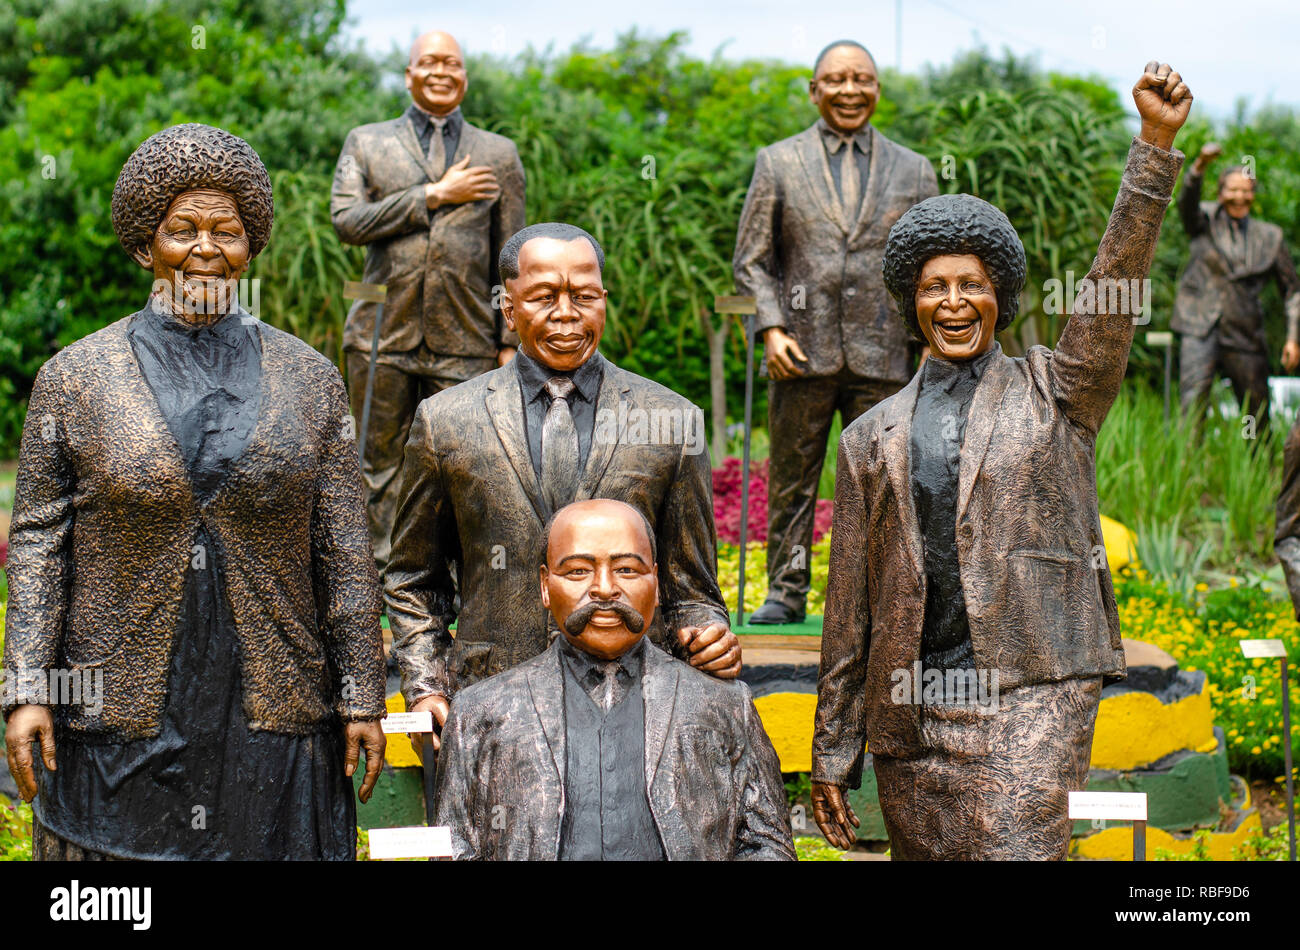 Durban, South Africa, 9th January 2019. Staues of African National Congress (ANC) stalwarts and former party presidents on display along the Ruth First Highway outside Durban ahead of the African National Congress (ANC) 2019 Election Manifesto Launch set to take place at Moses Mabhida Stadium in Durban on Saturday, 12th January, 2019. Pictured are (in front) John Langalilabele Dube, (behind him, l-r) Albertina Sisulu, Alfred Xuma and Winnie Mandela, (back, l-r) Jacob Zuma, Cyril Ramaphosa and Nelson Mandela. Jonathan Oberholster/Alamy Live News Stock Photo